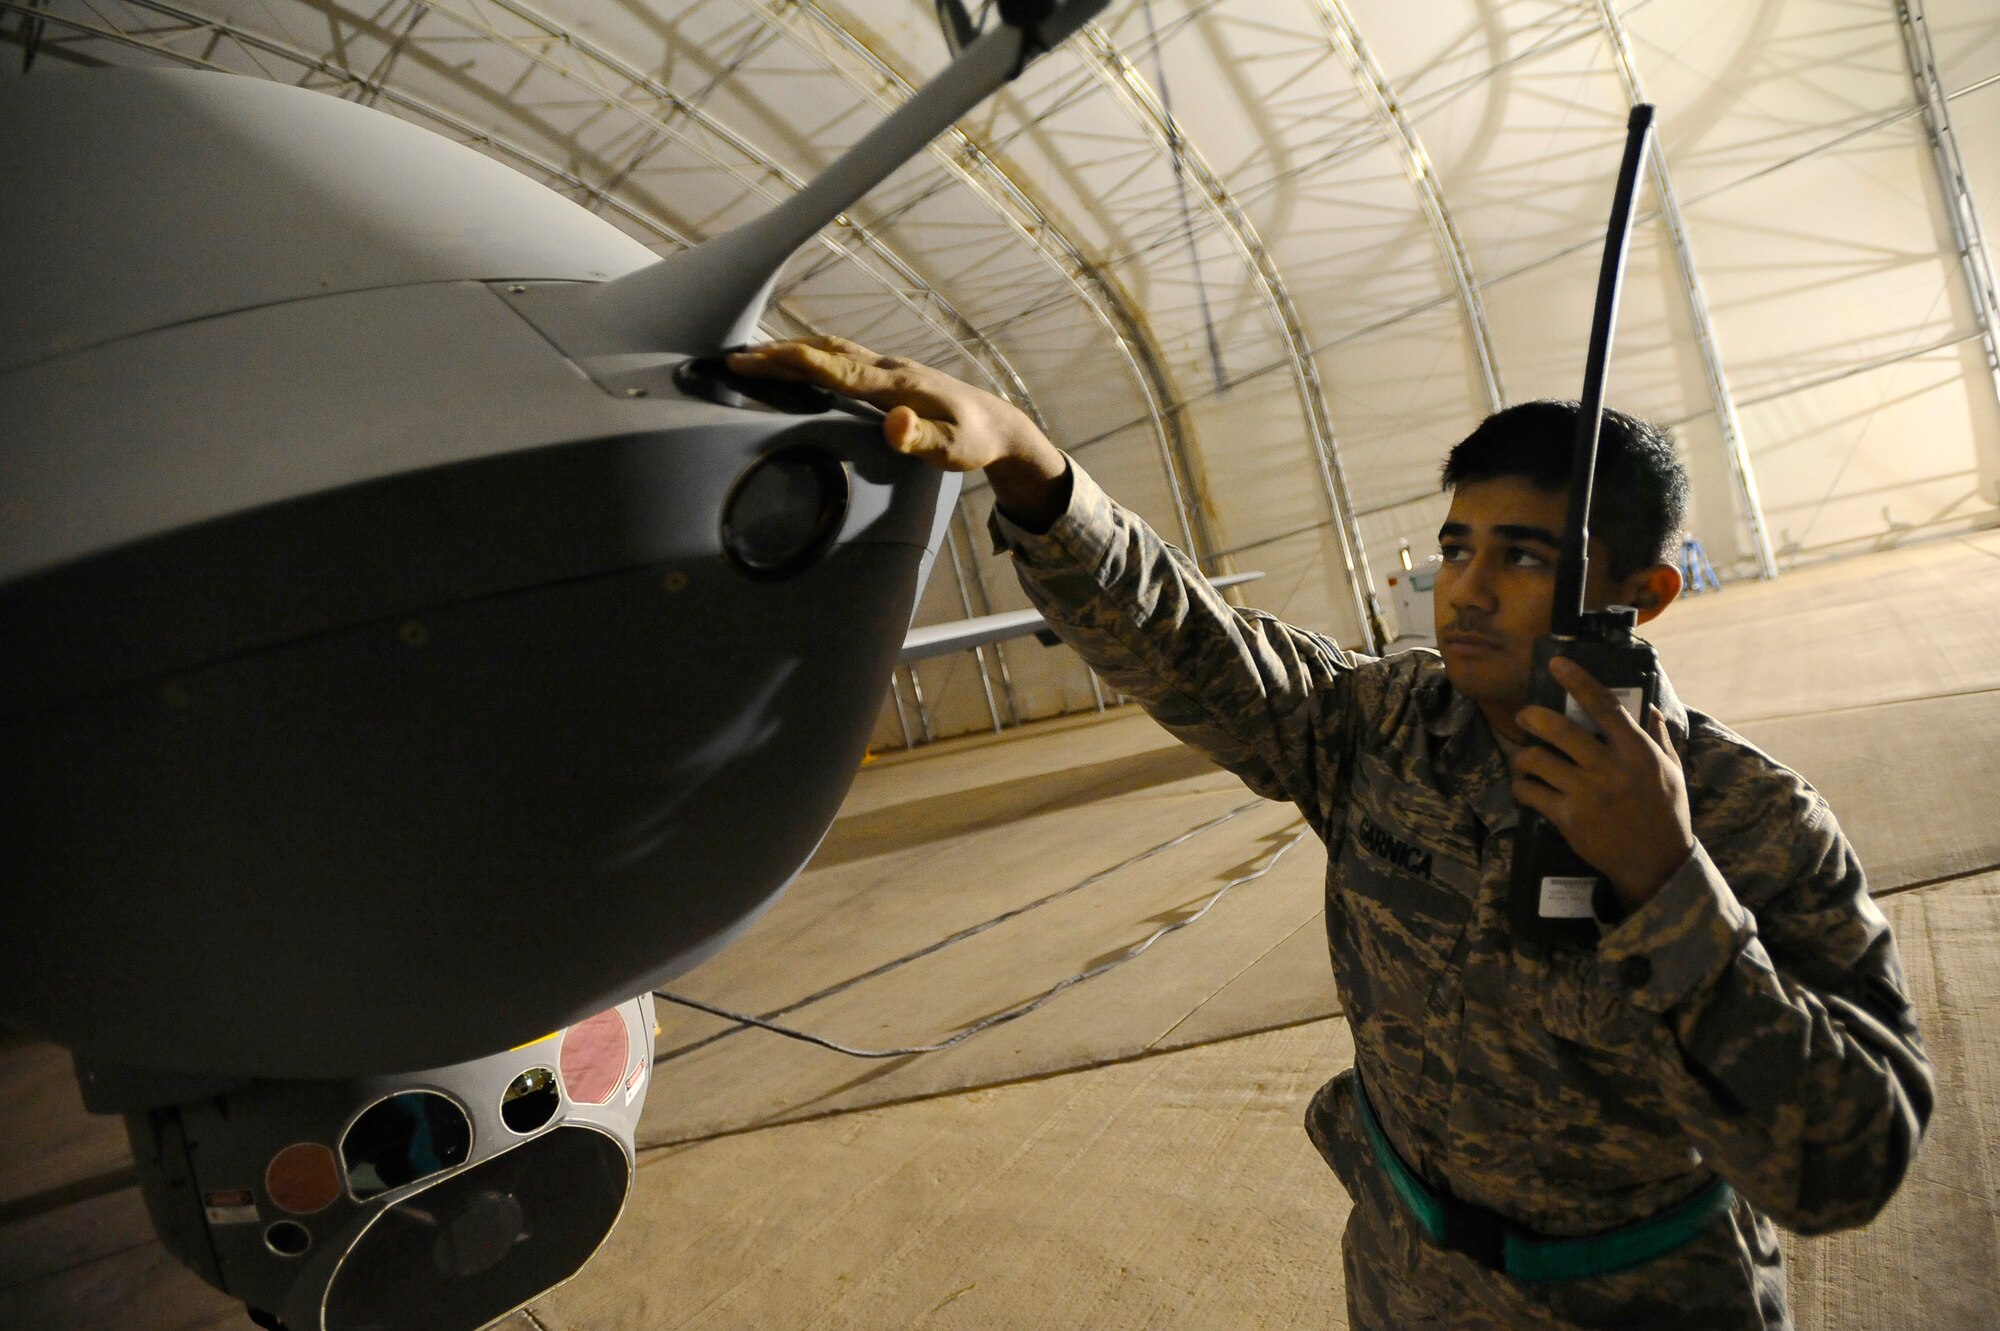 Airman 1st Class Hugo Garnica inspects a lens on an MQ-9 Reaper at Joint Base Balad, Iraq, Nov. 18. He was performing a pre-flight check of the unmanned aircraft vehicle to ensure it was operational. Garnica, an assistant dedicated crew chief assigned to the 332nd Expeditionary Aircraft Maintenance Squadron, is deployed from Creech Air Force Base, Nev. His hometown is Oceanside, Calif. (U.S. Air Force photo/Airman 1st Class Jason Epley)